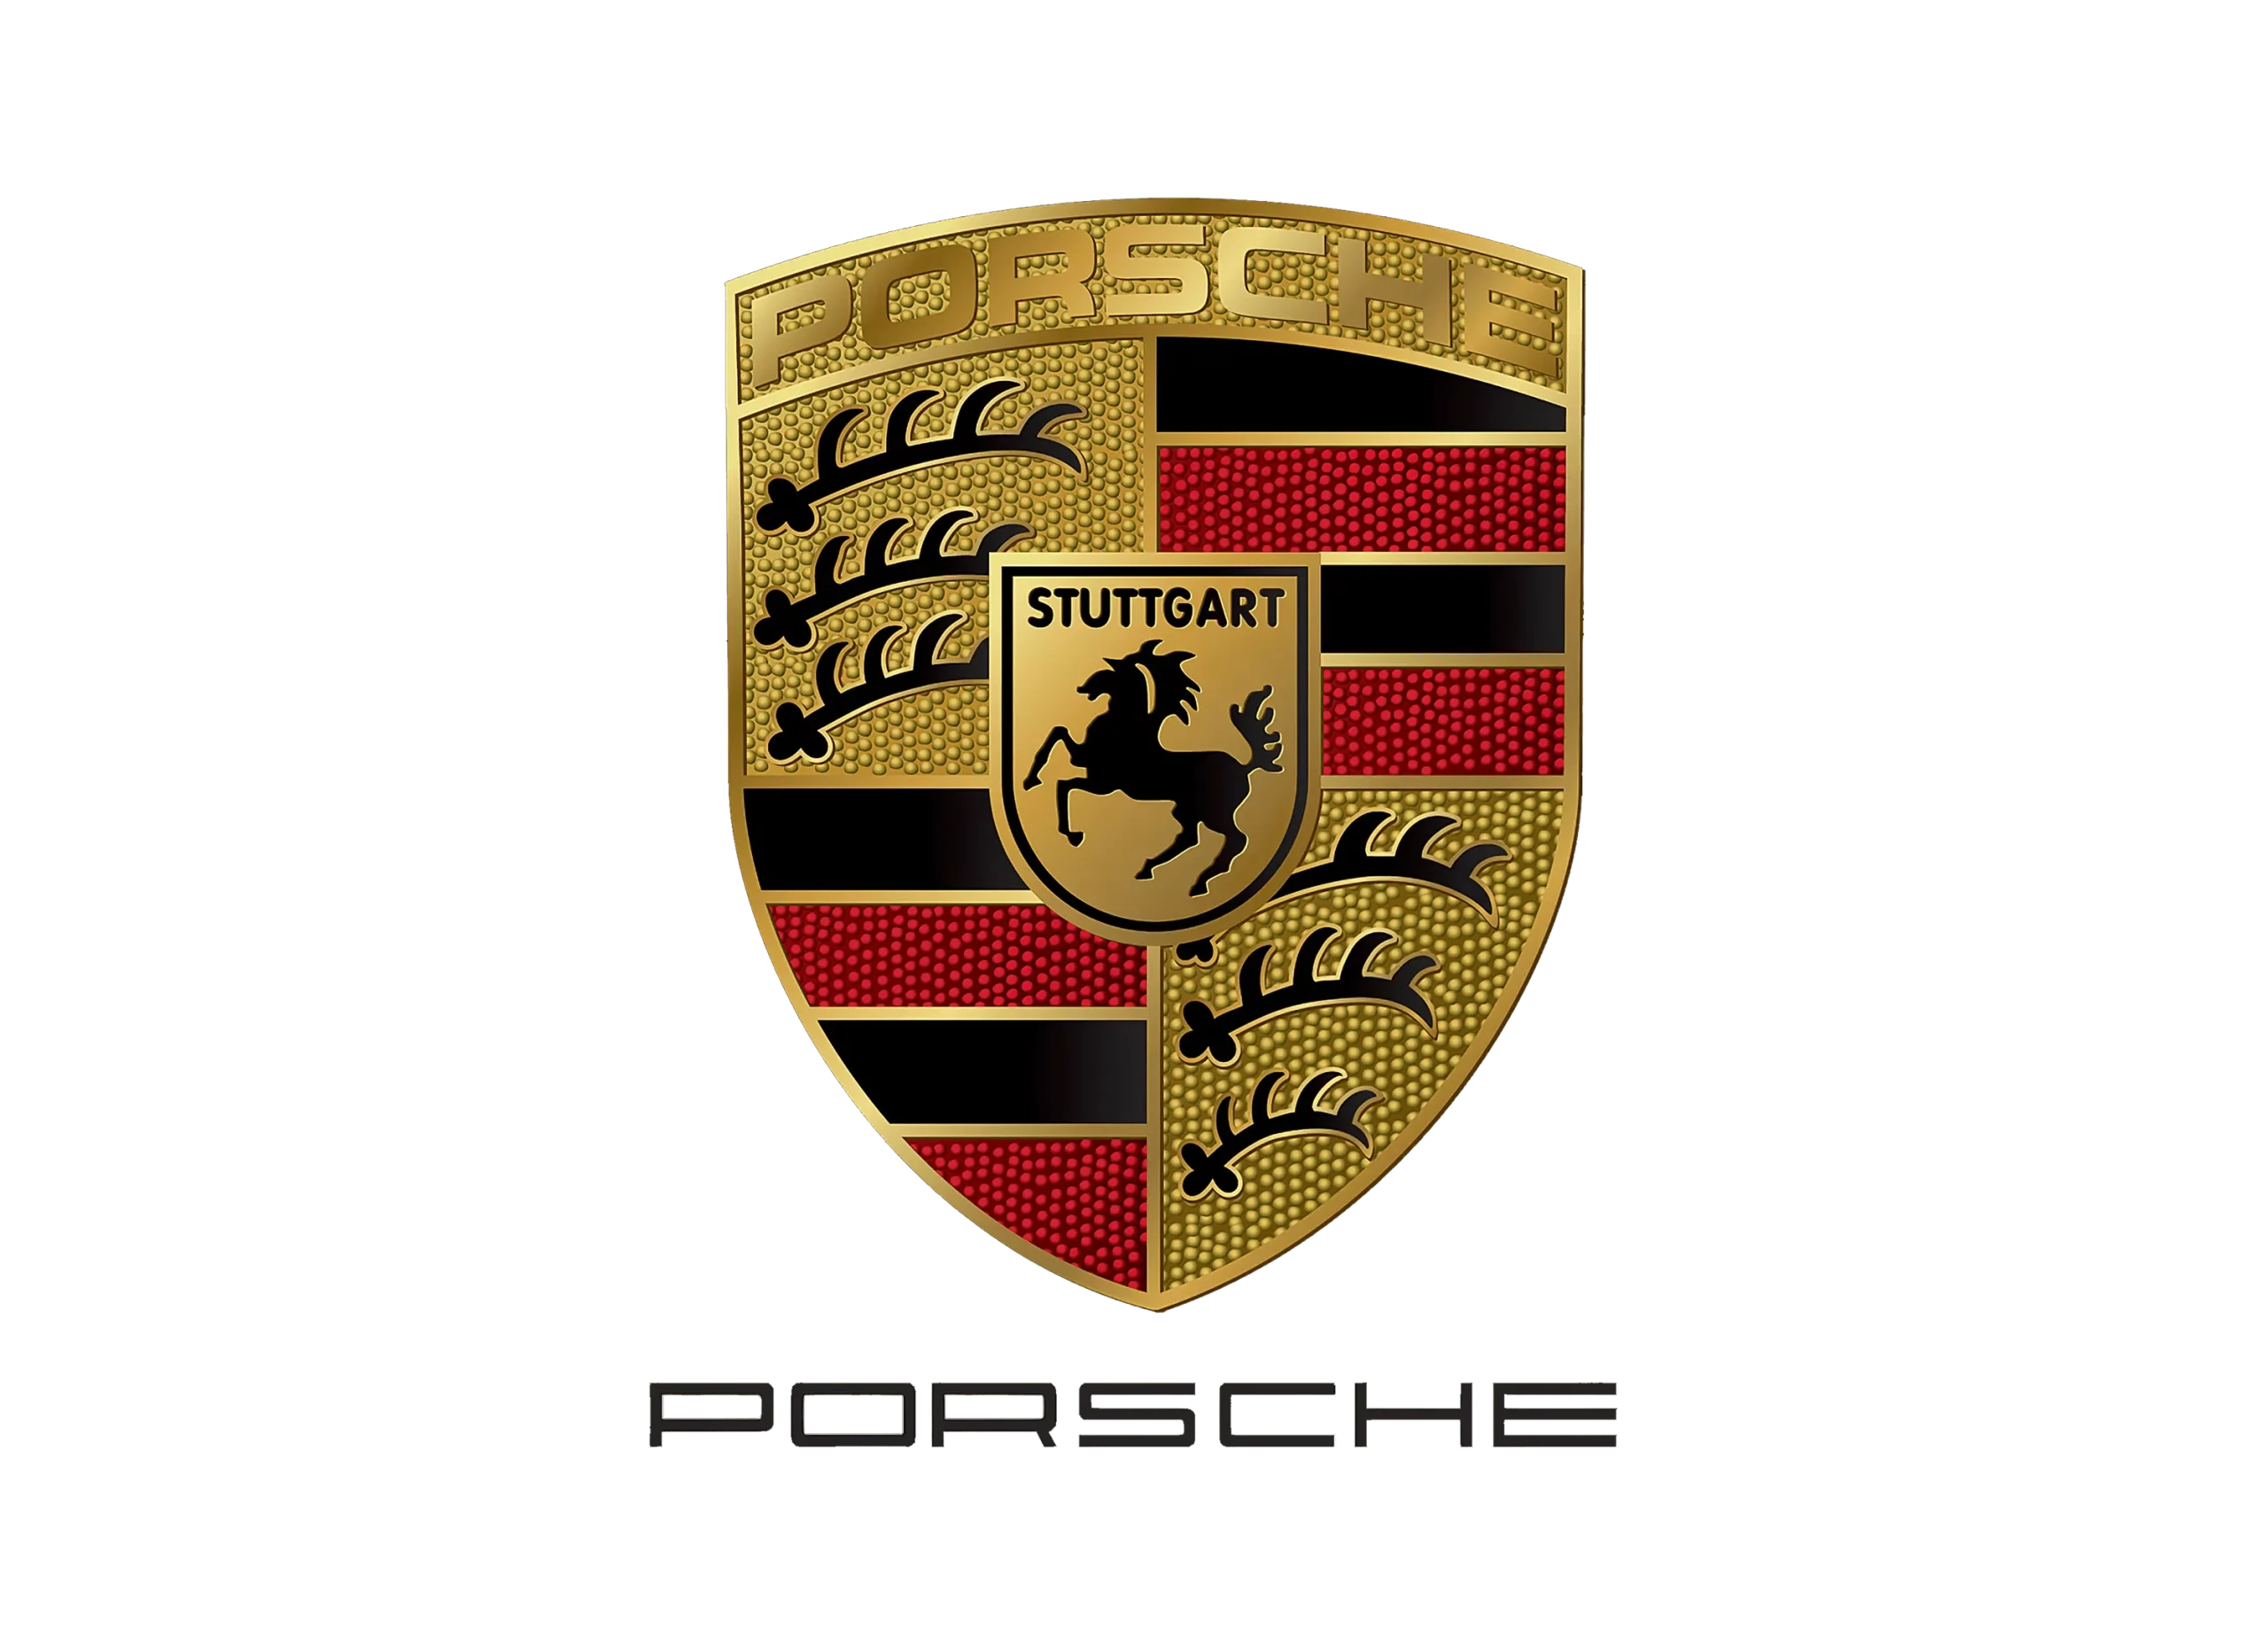 Porsche Logo and symbol, meaning, history, WebP, brand